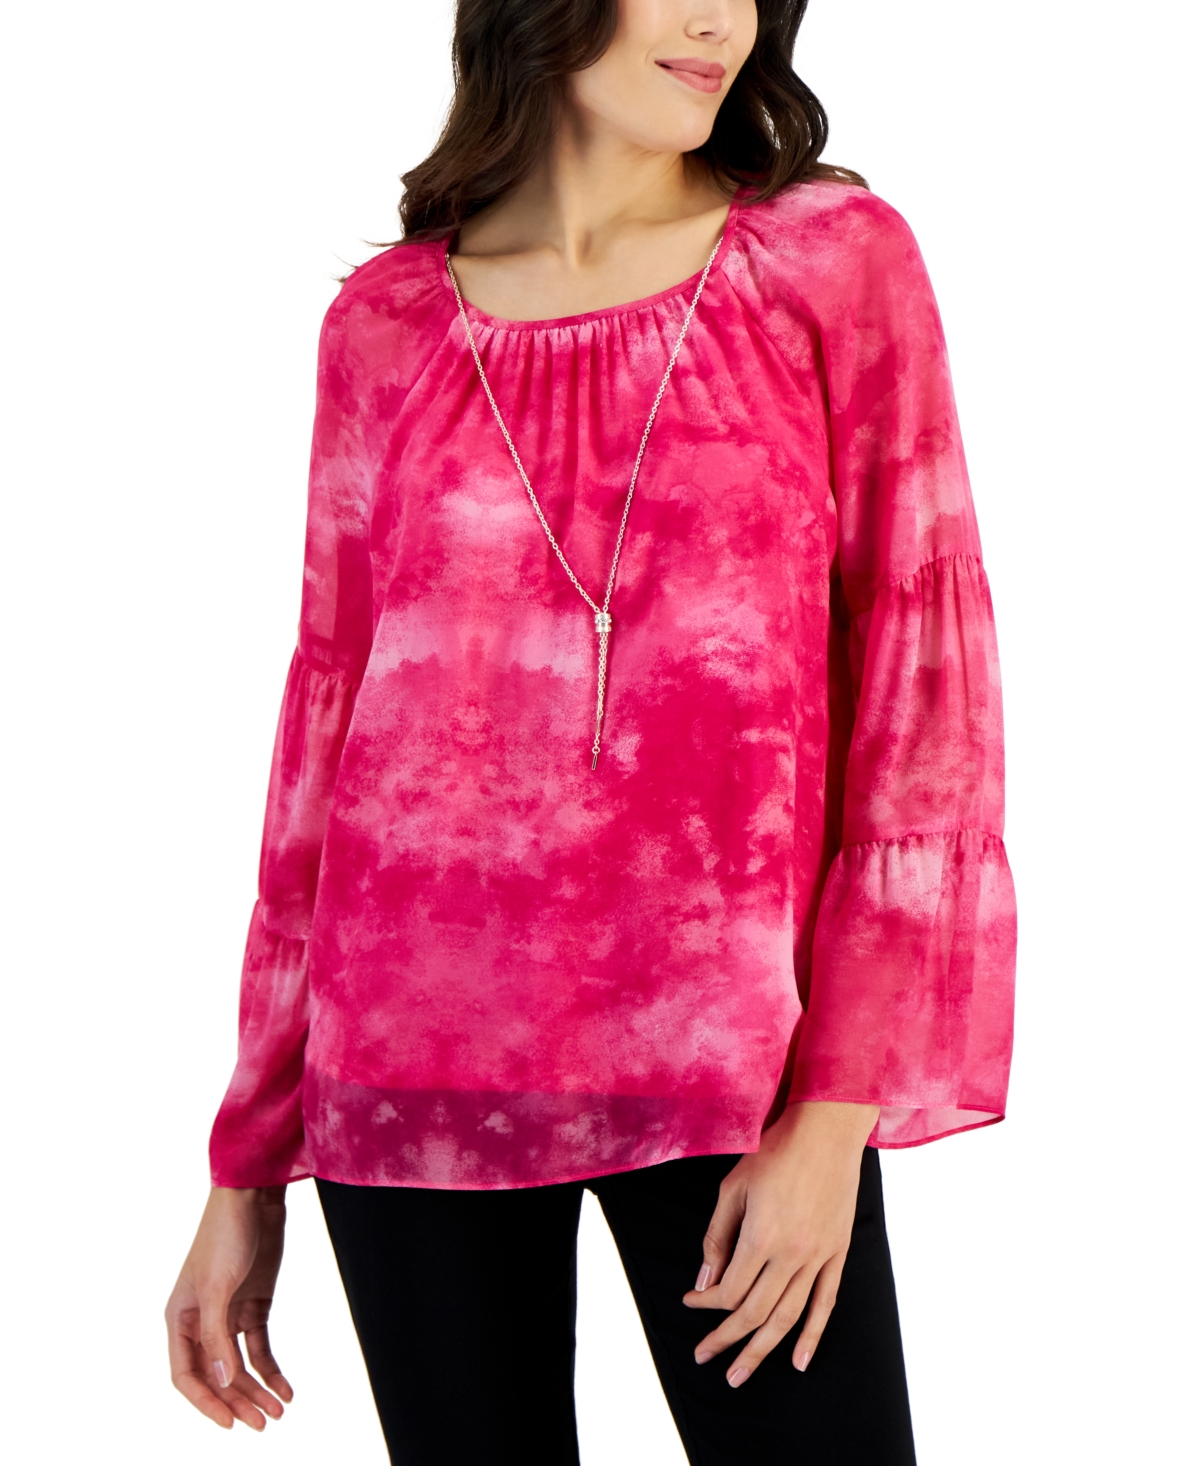 Women's New Year Tie-Dyed Necklace Top, Created for Macy's - Divine Berry Combo